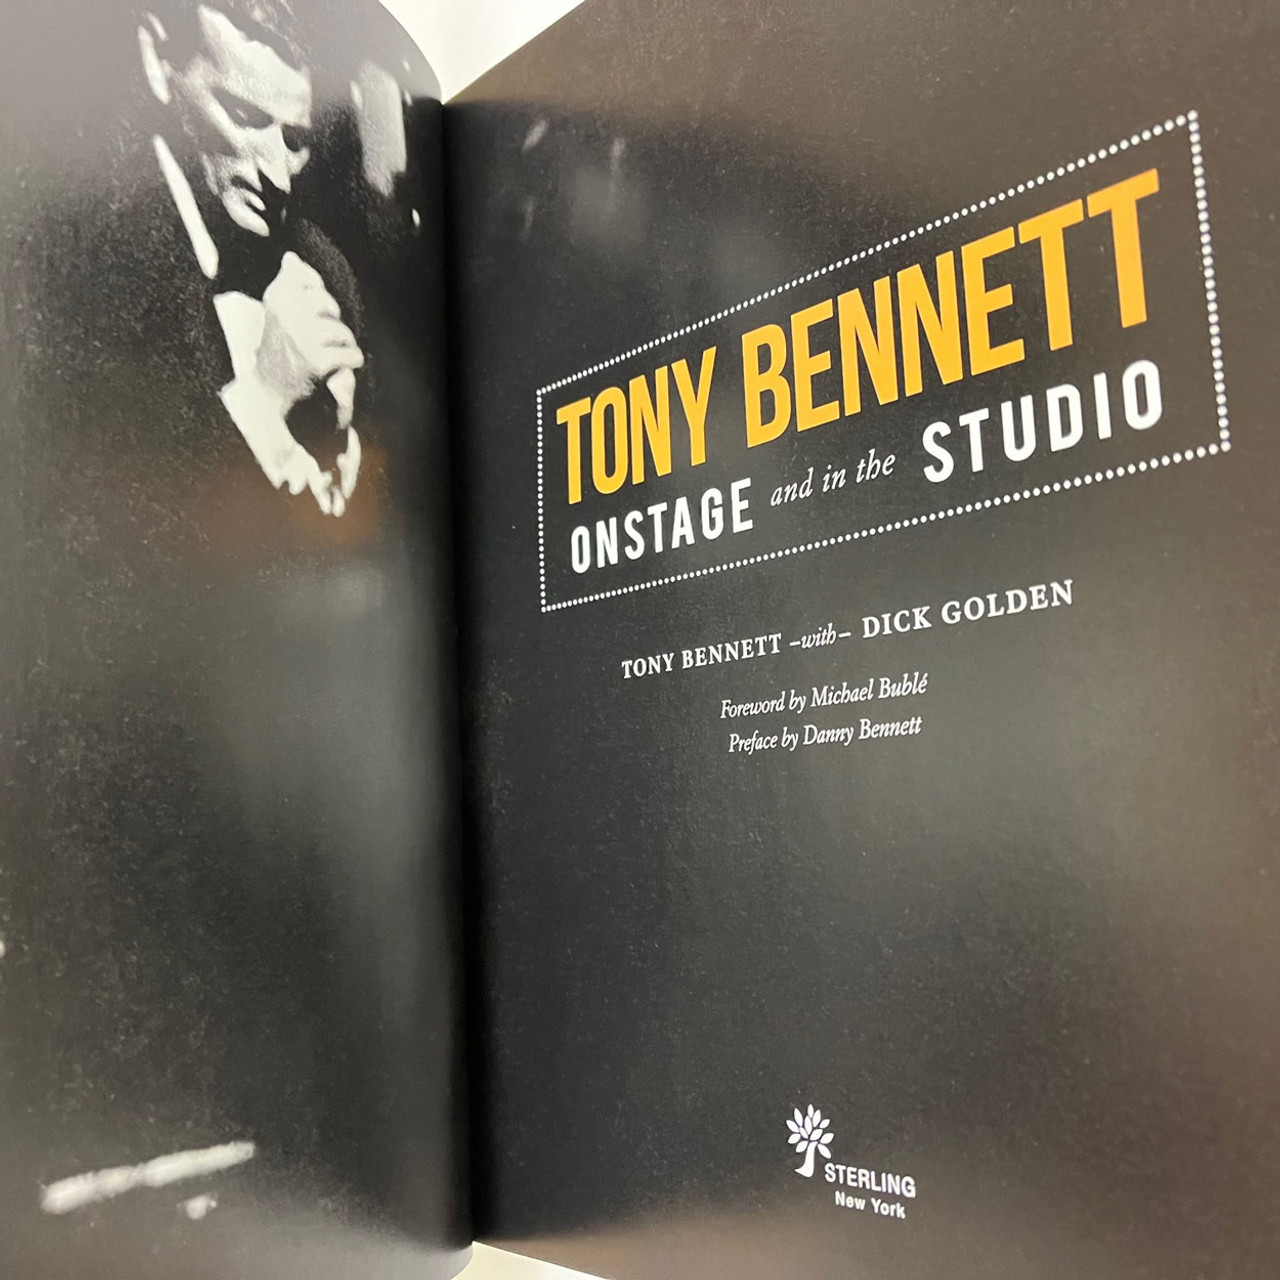 Tony Bennett "Tony Bennett Onstage and in the Studio" Signed First Edition, First Printing w/COA  [Fine/Fine w/Archival Sleeve Protection]